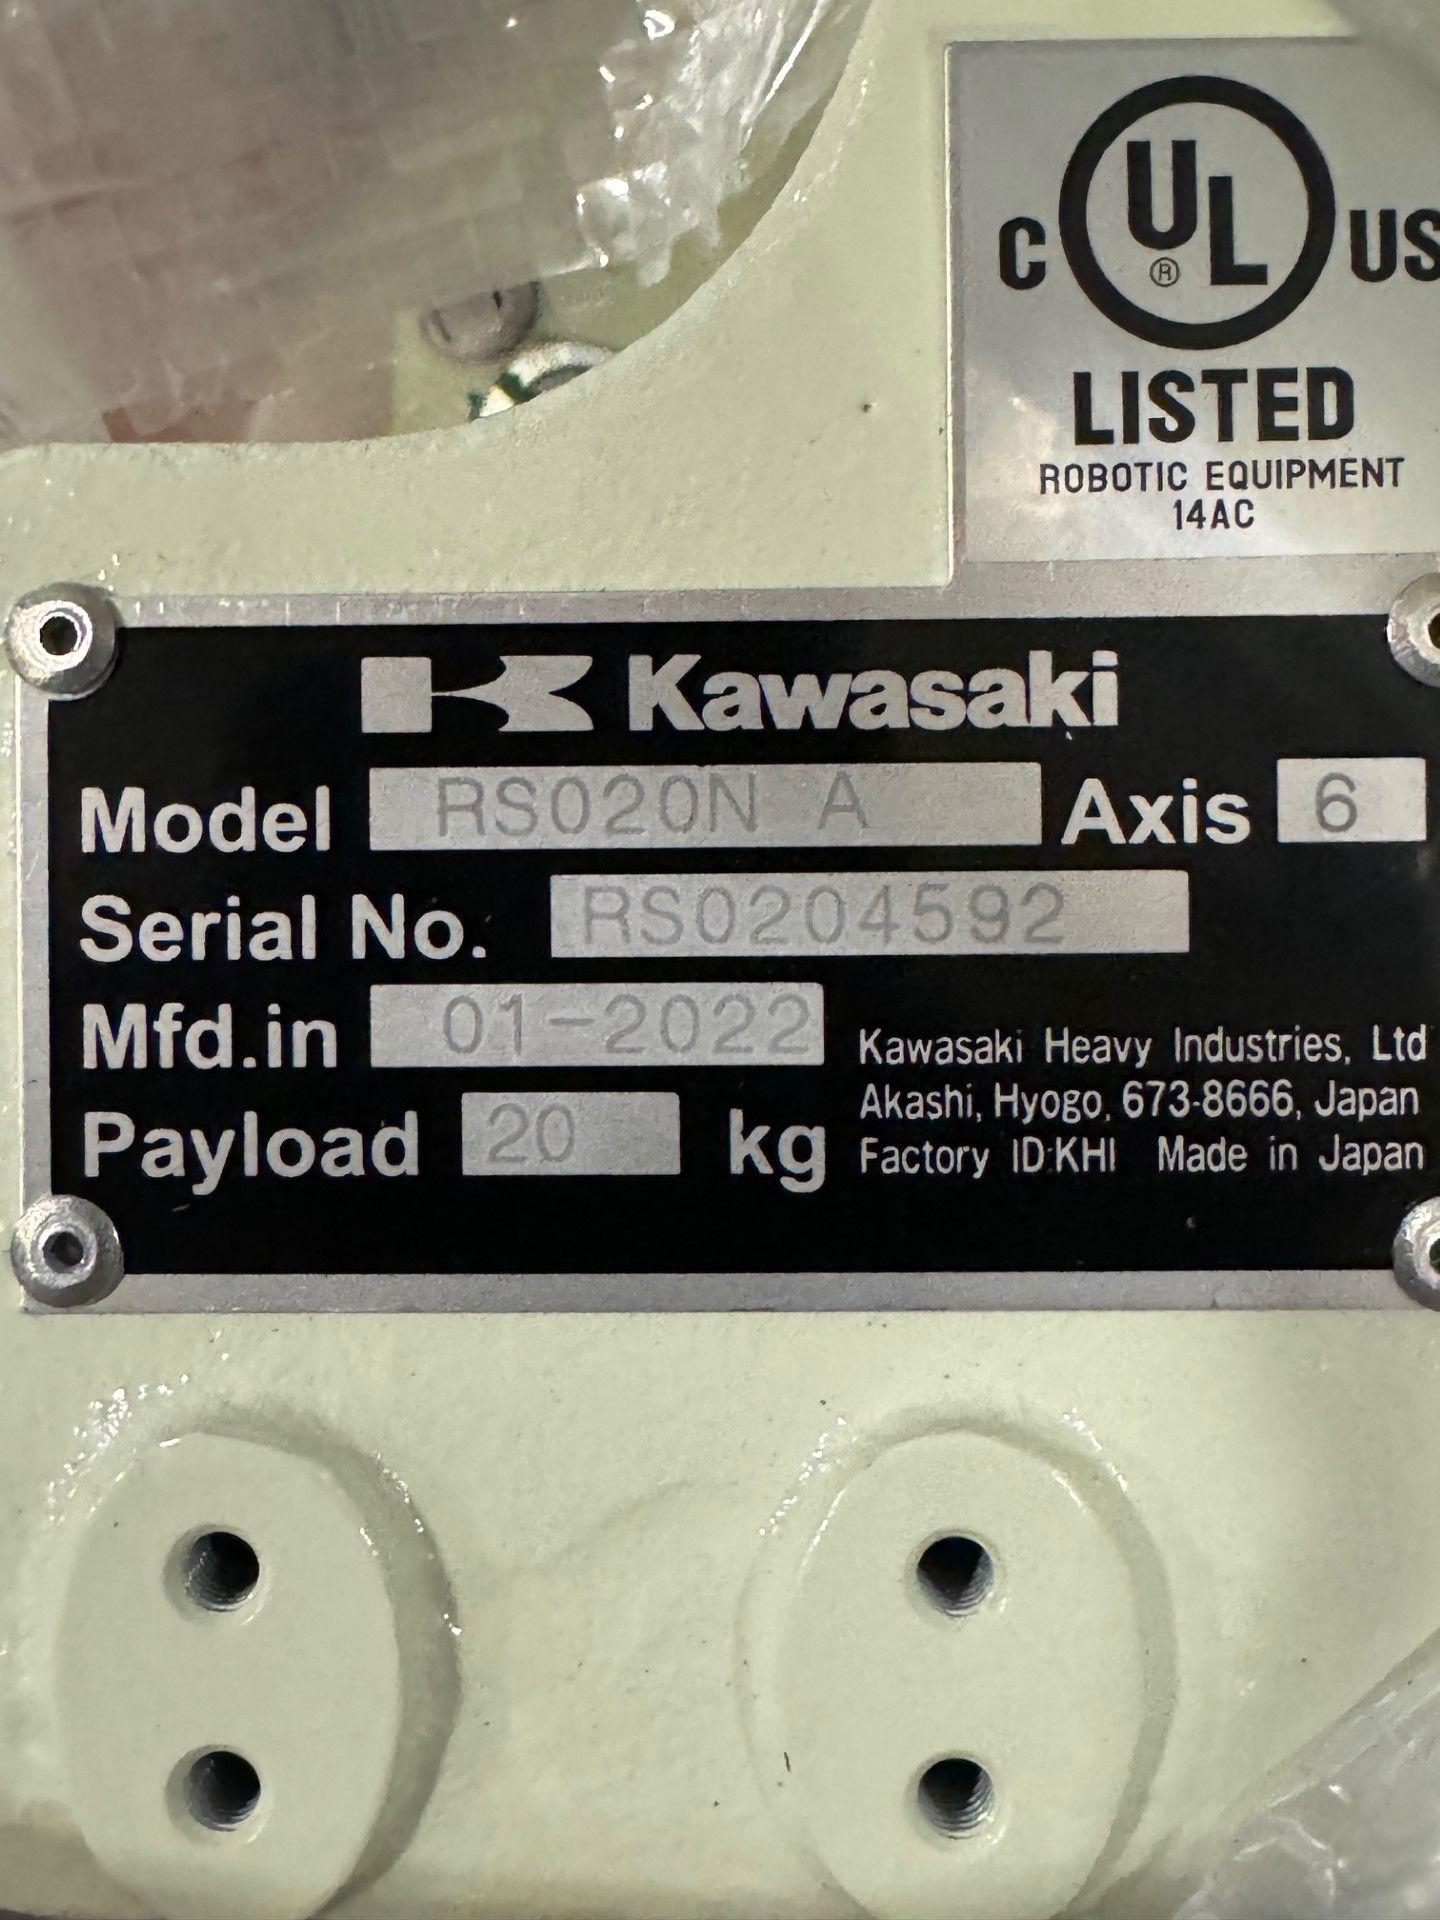 NEW KAWASAKI ROBOT MODEL RS020N, SN 4592, 20KG X 1725MM REACH WITH EO1 CONTROLS, CABLES & TEACH - Image 7 of 7